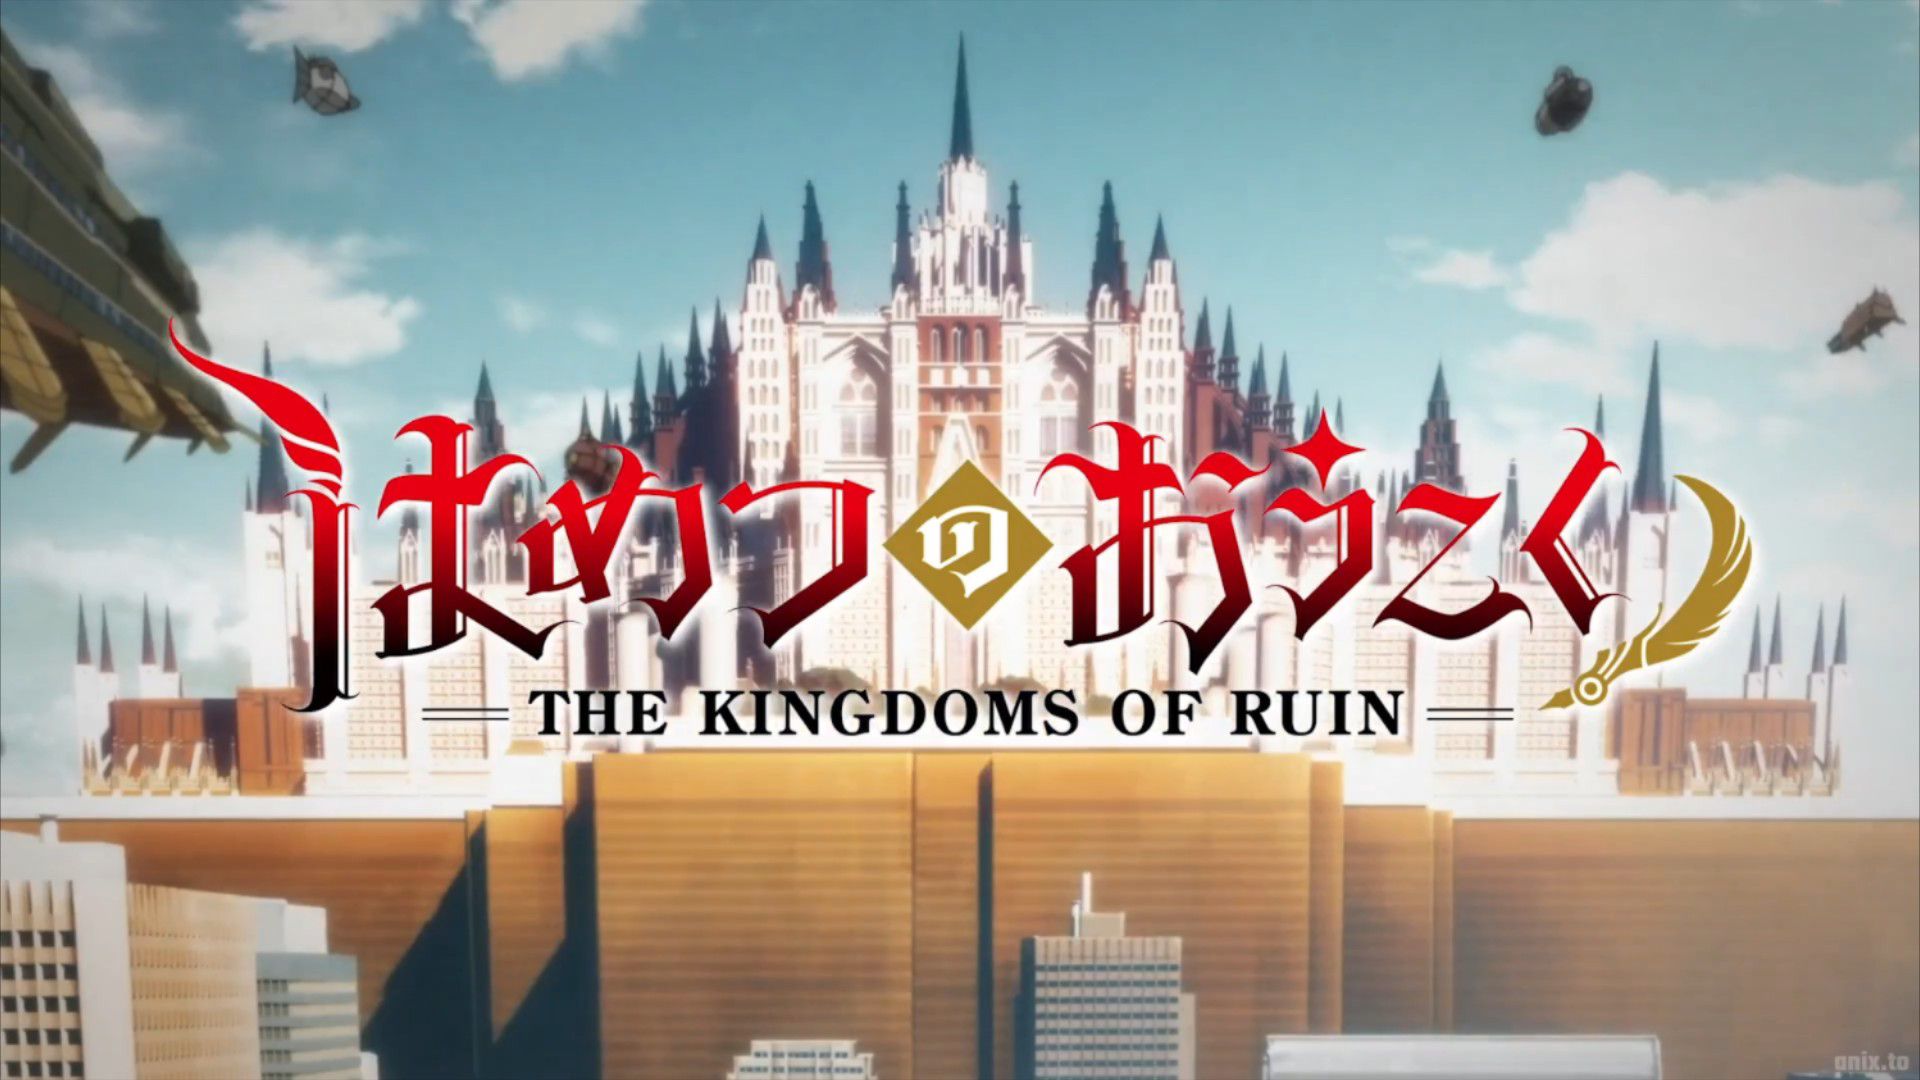 The Kingdoms of Ruin episode 1: Release date and time, where to watch, and  more